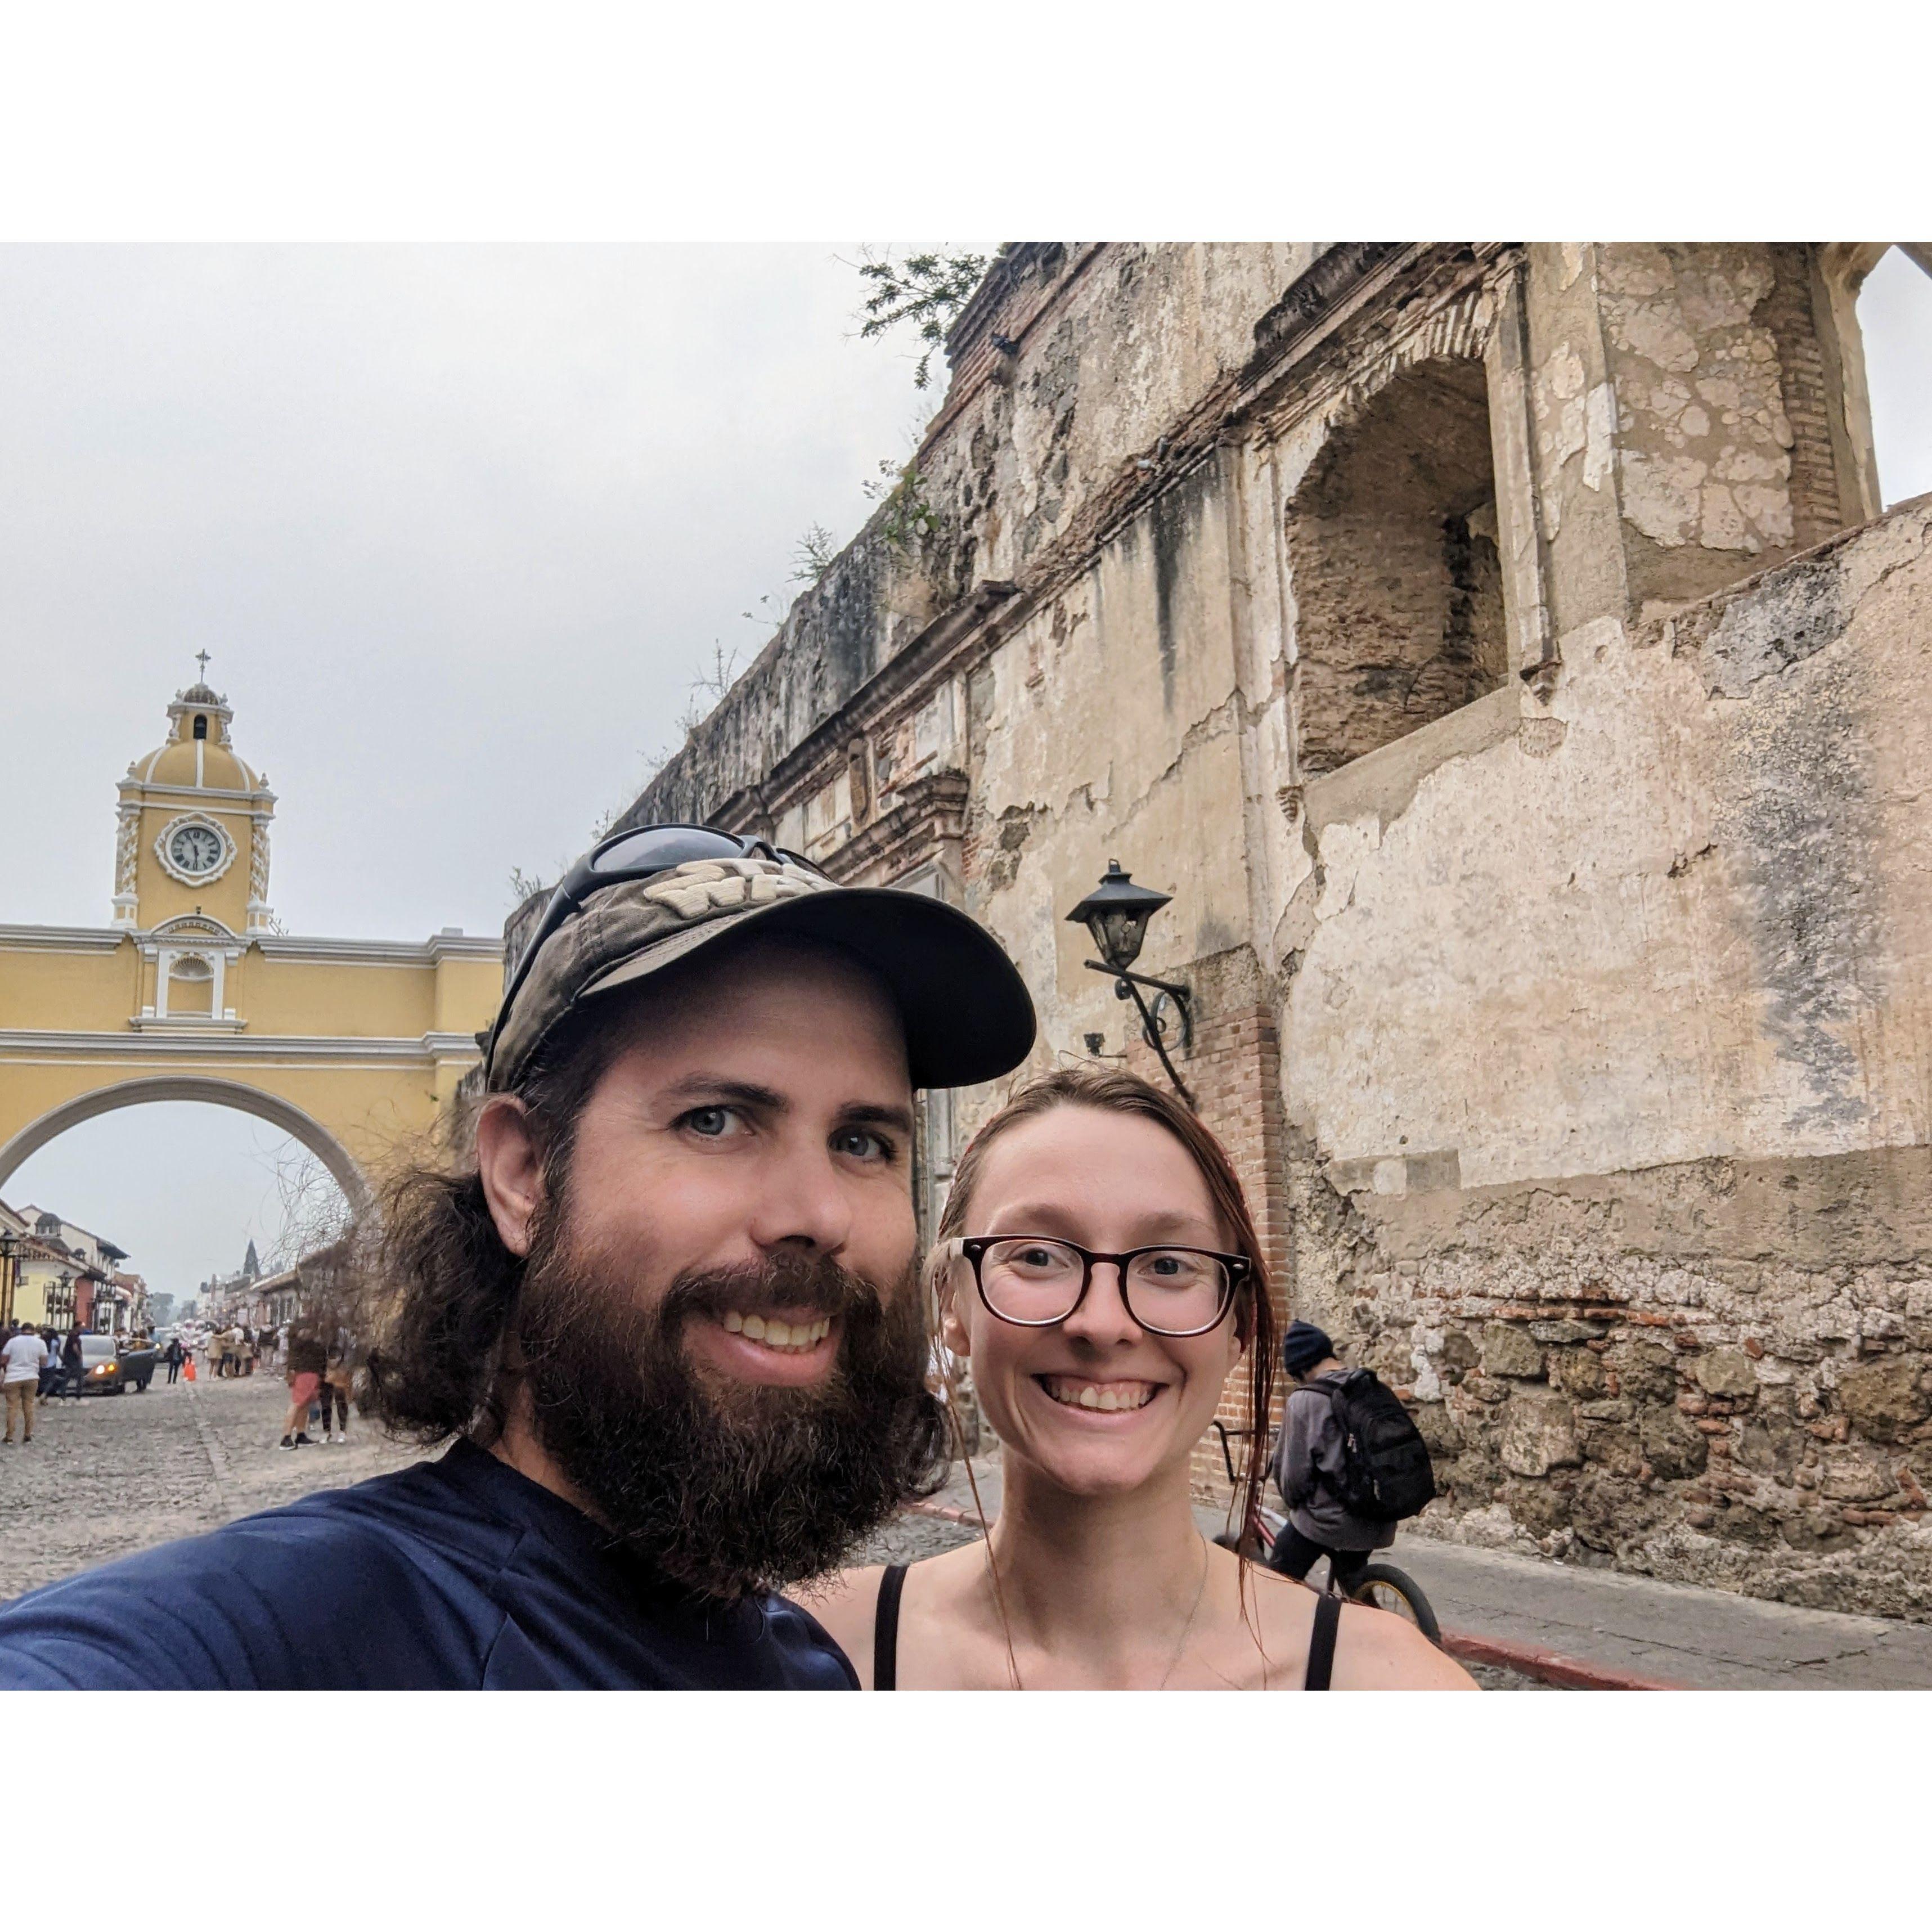 From our trip to Guatemala in the summer of 2023, this was Dale's first international trip. This photo was taken in Antigua, Guatemala.